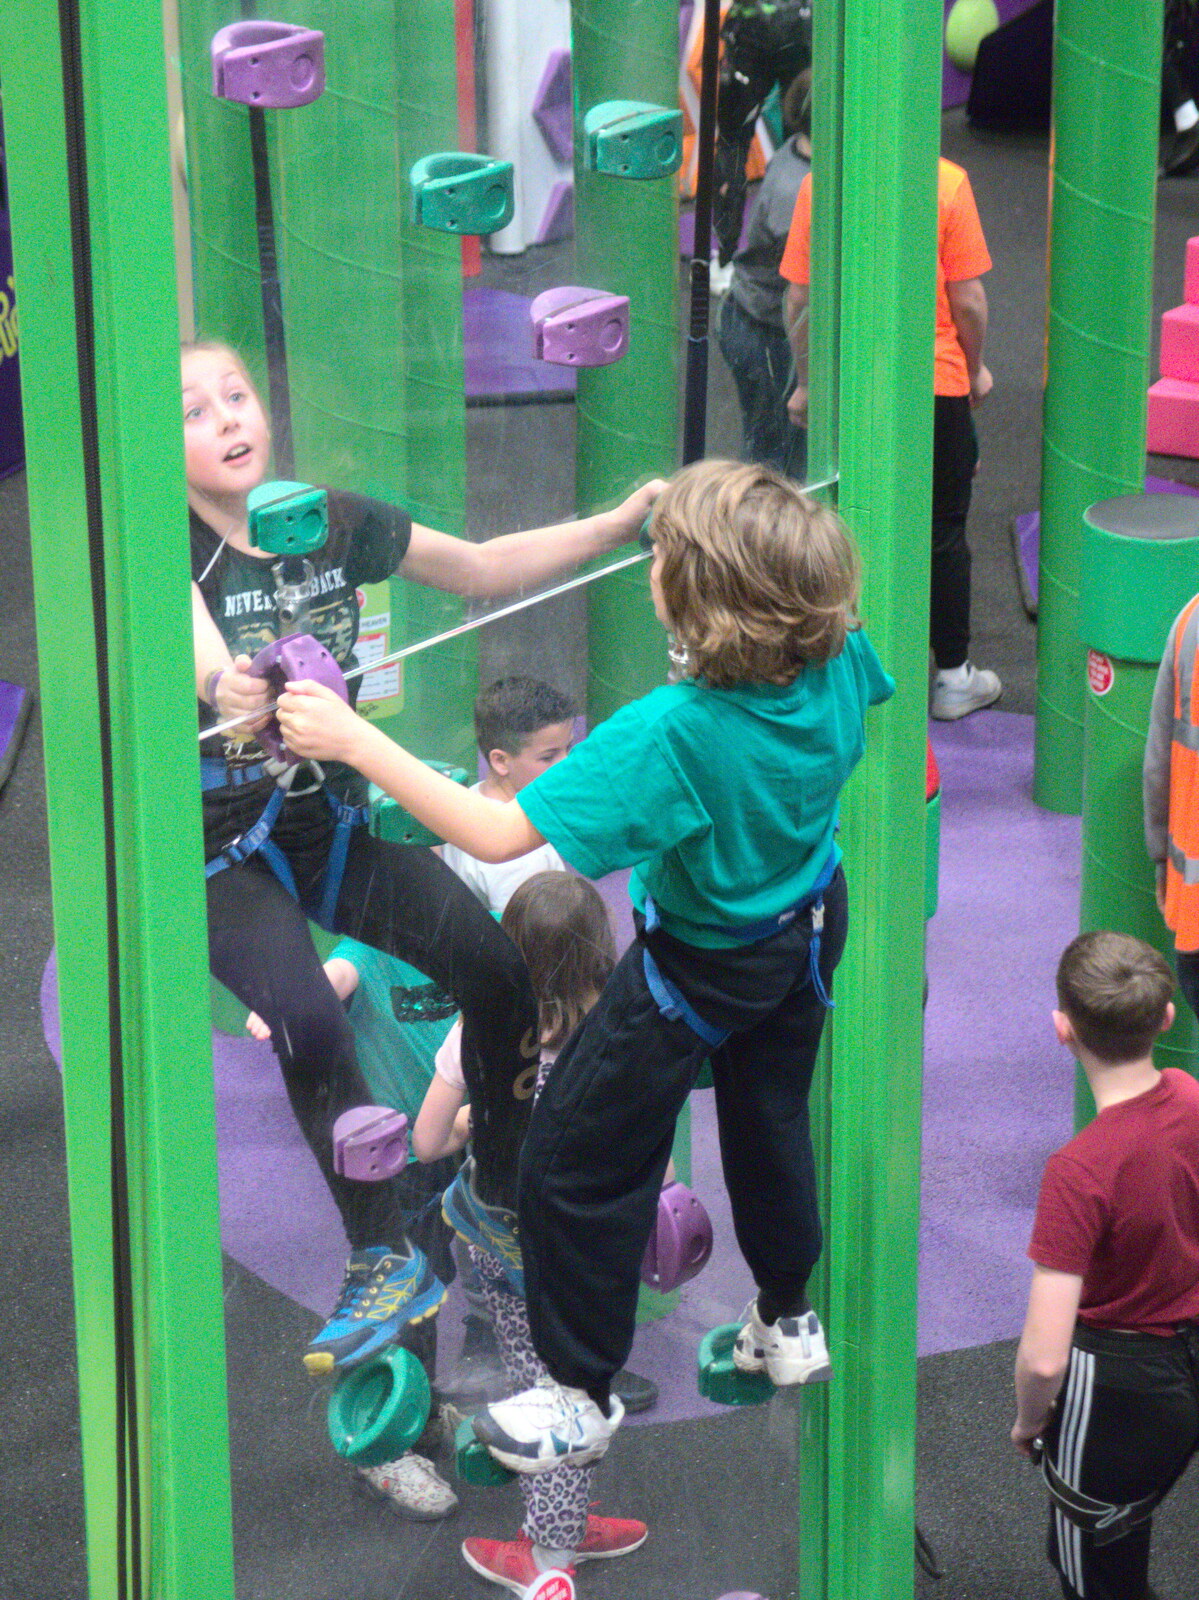 Head-to-head climbing from Clip and Climb, The Havens, Ipswich - 15th February 2020